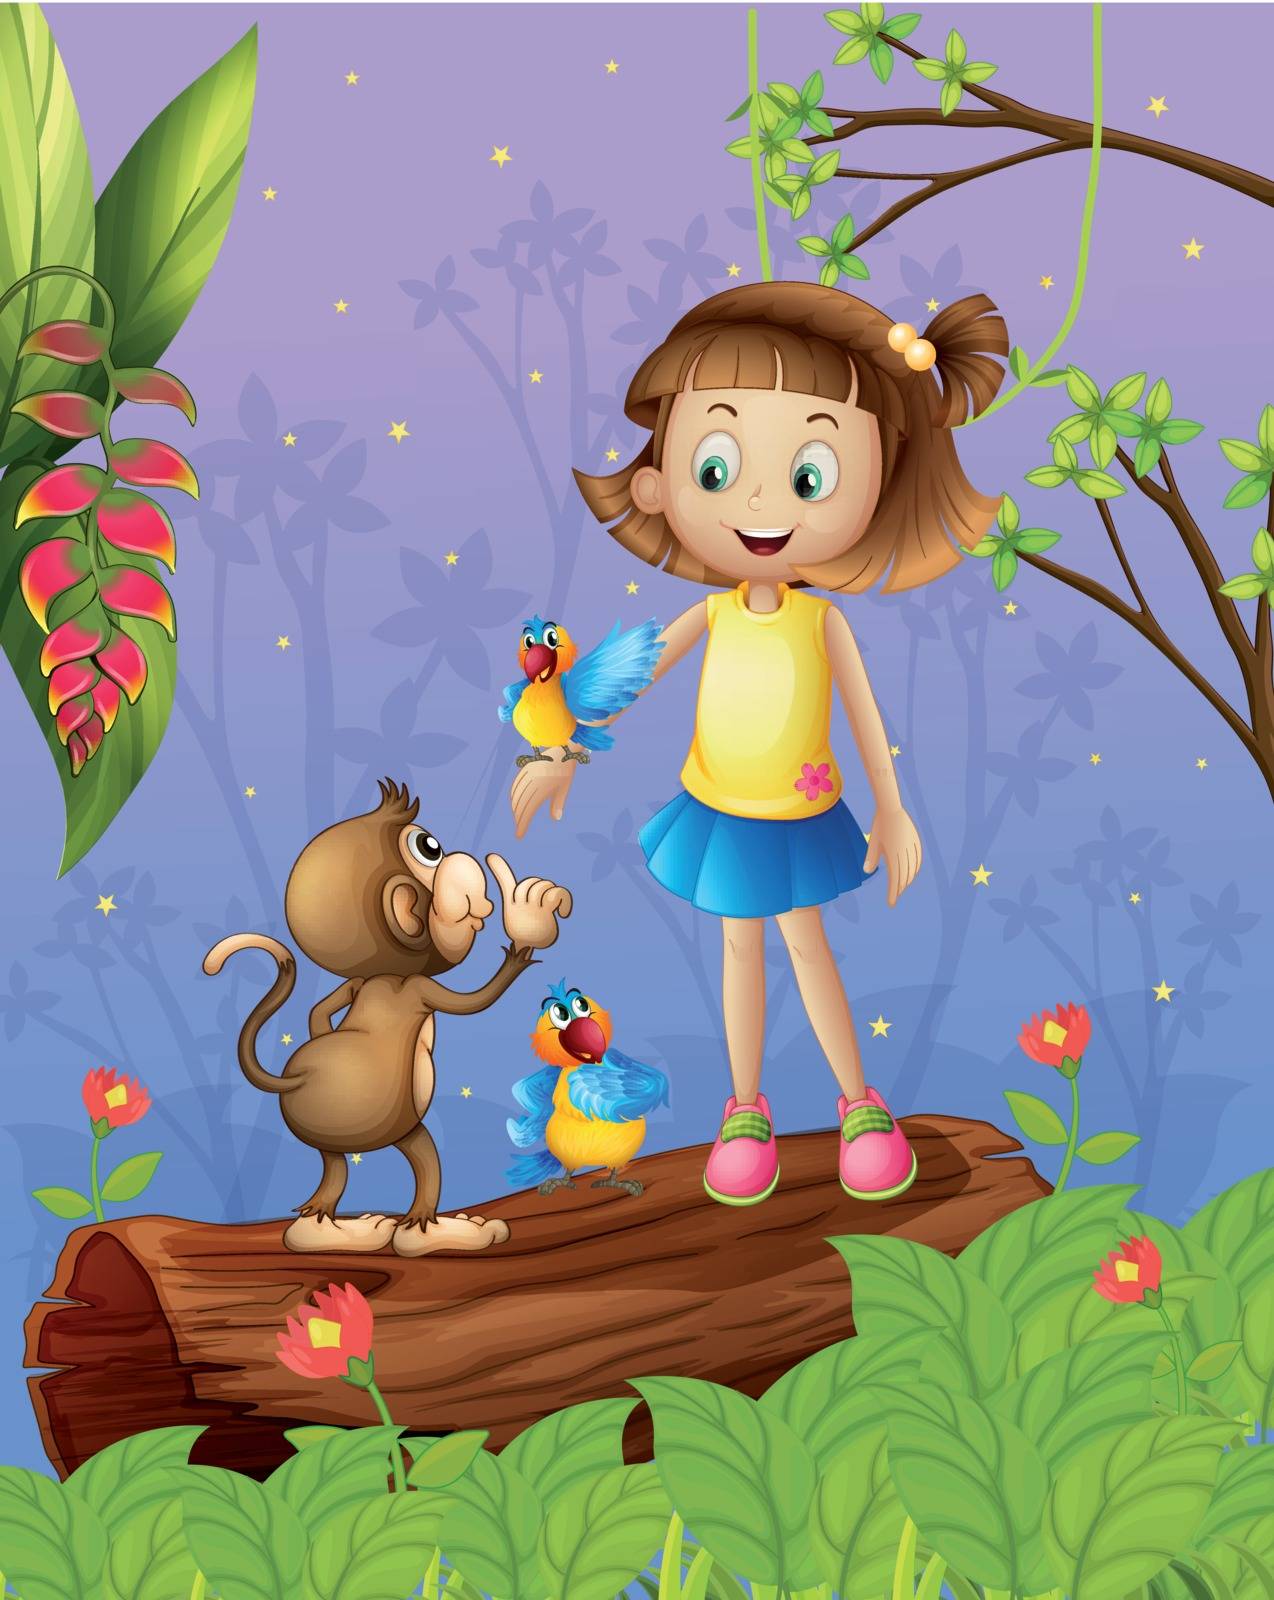 Illustration of a young girl with two parrots and a monkey in the forest